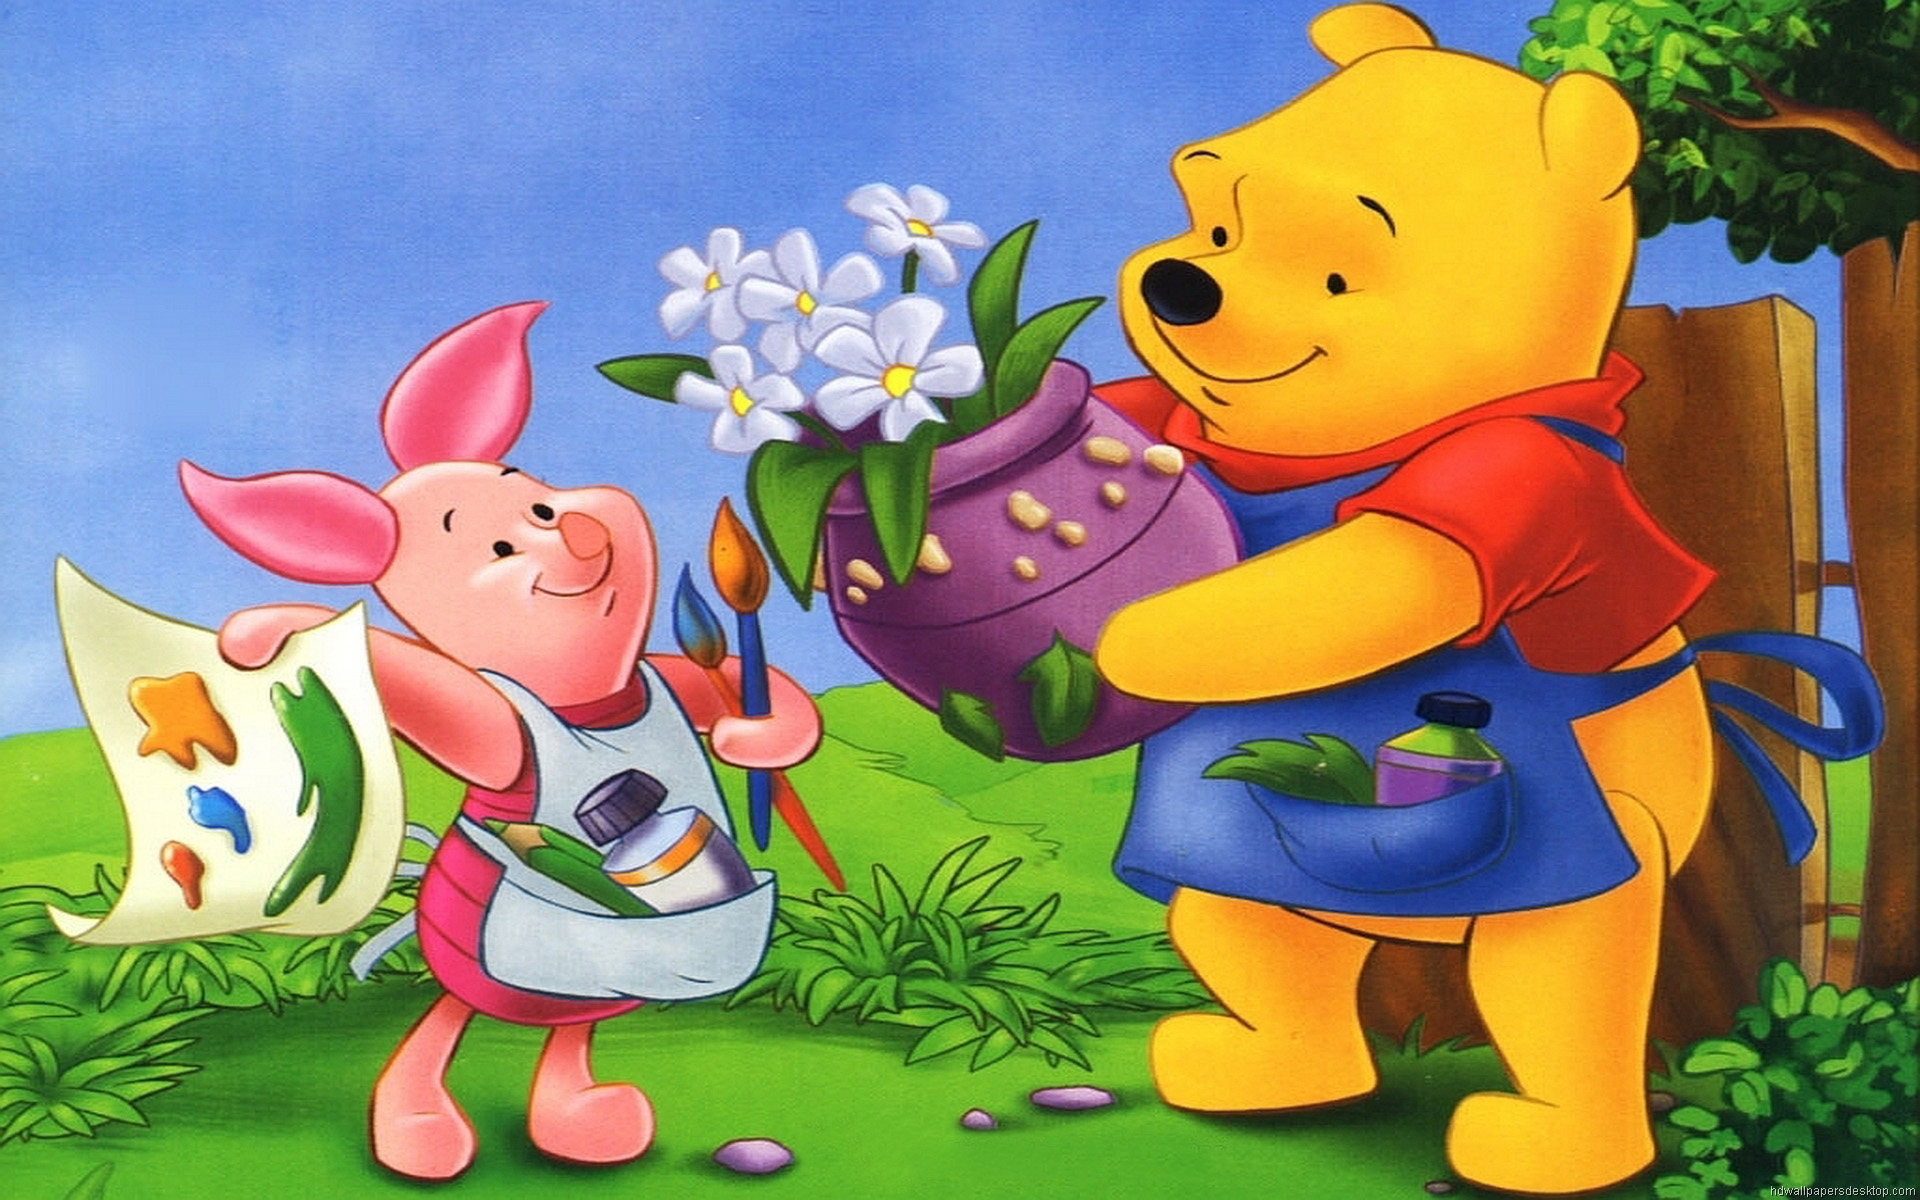 Winnie The Pooh And Piglet Vase With Flowers Wallpapers Hd 1920x1200.